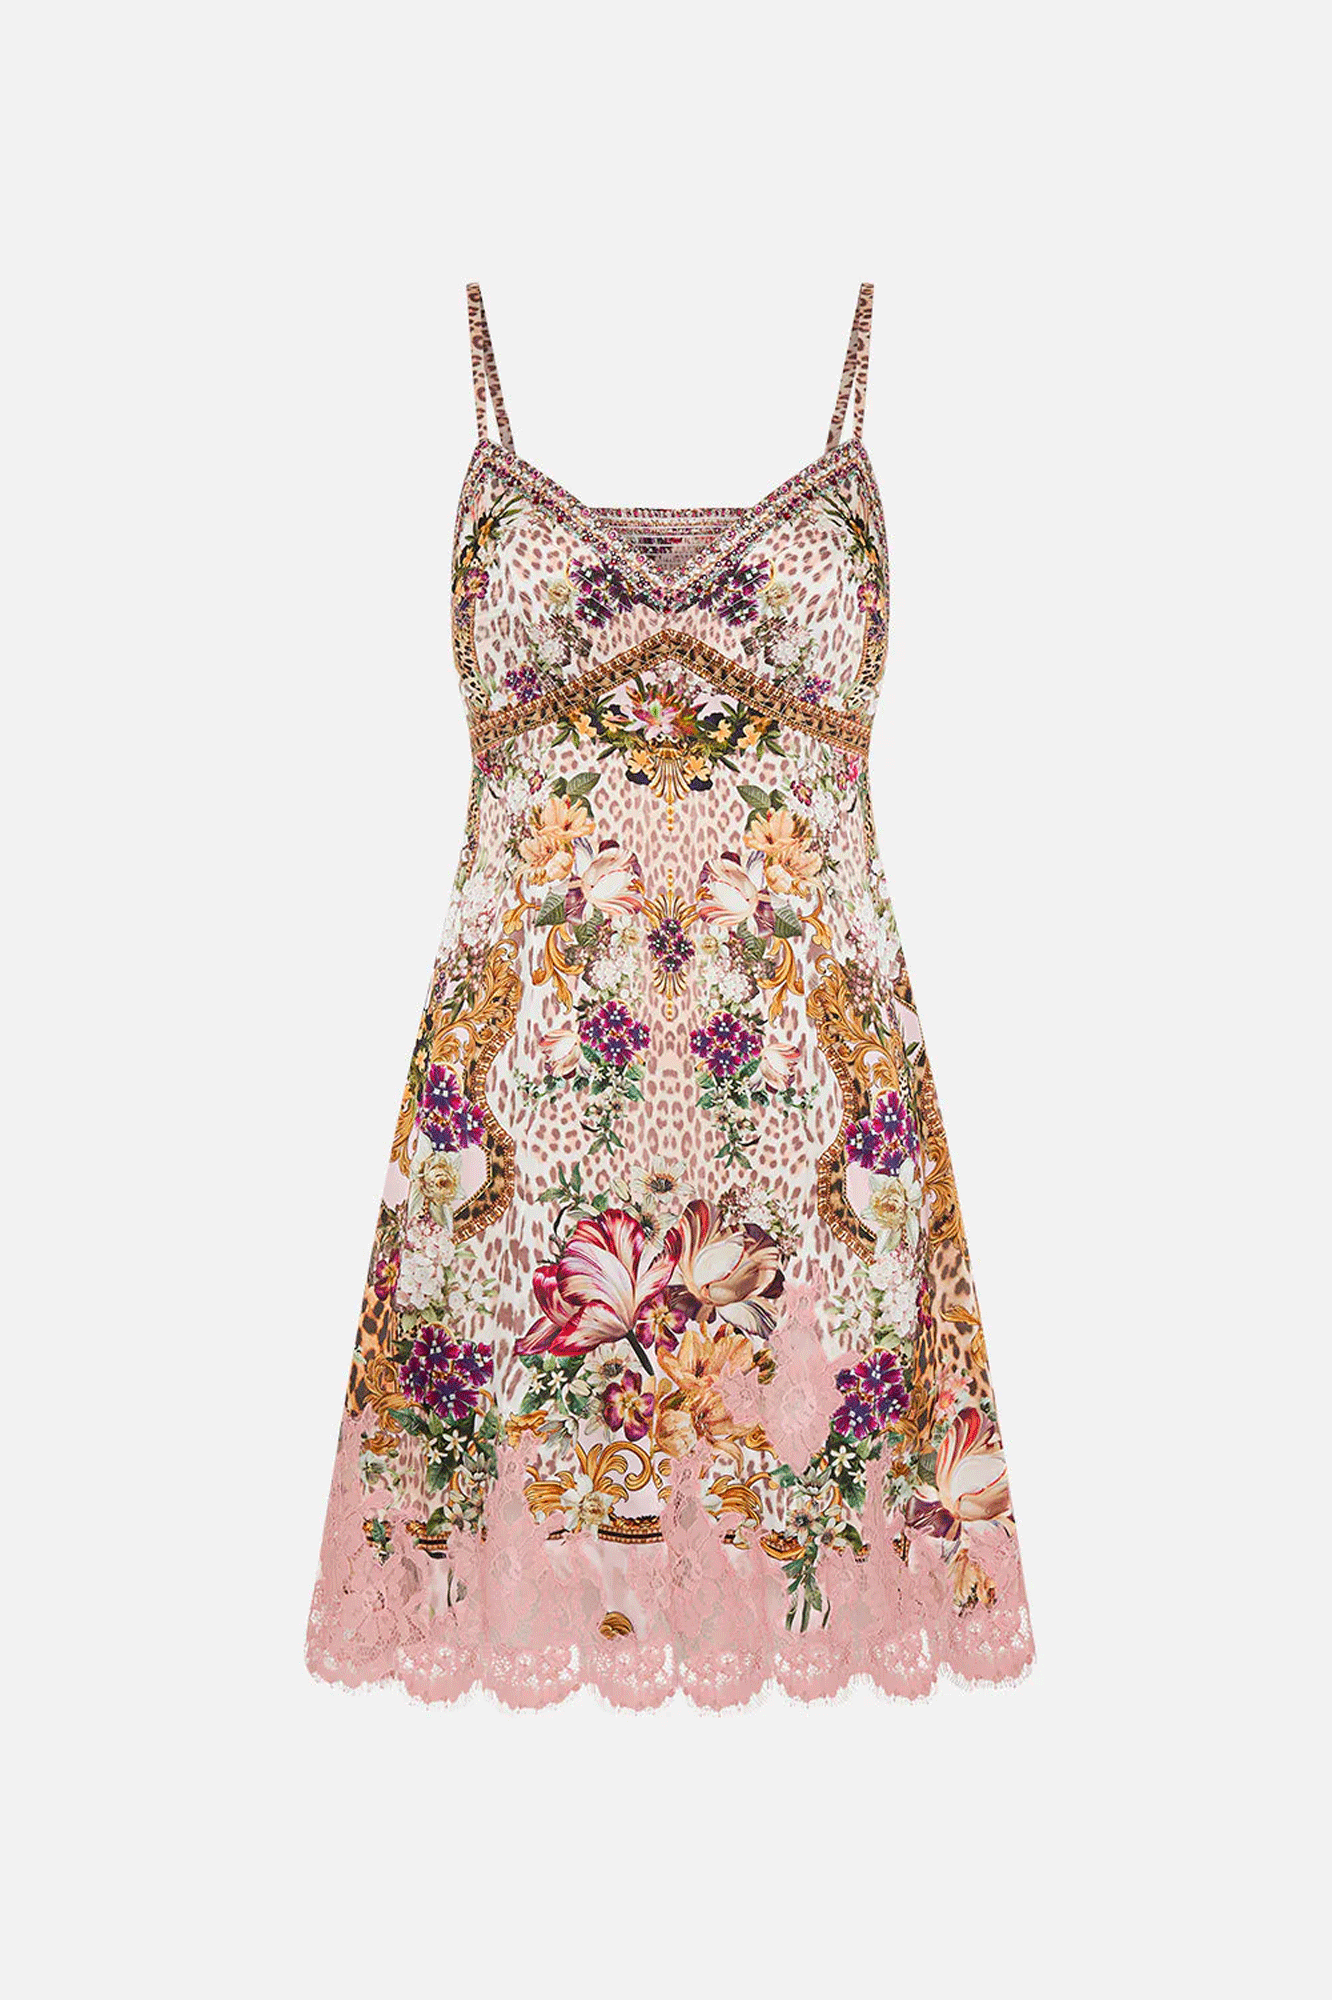 Unleash your wild side with the Bambino Bliss Short Slip Dress from Camilla